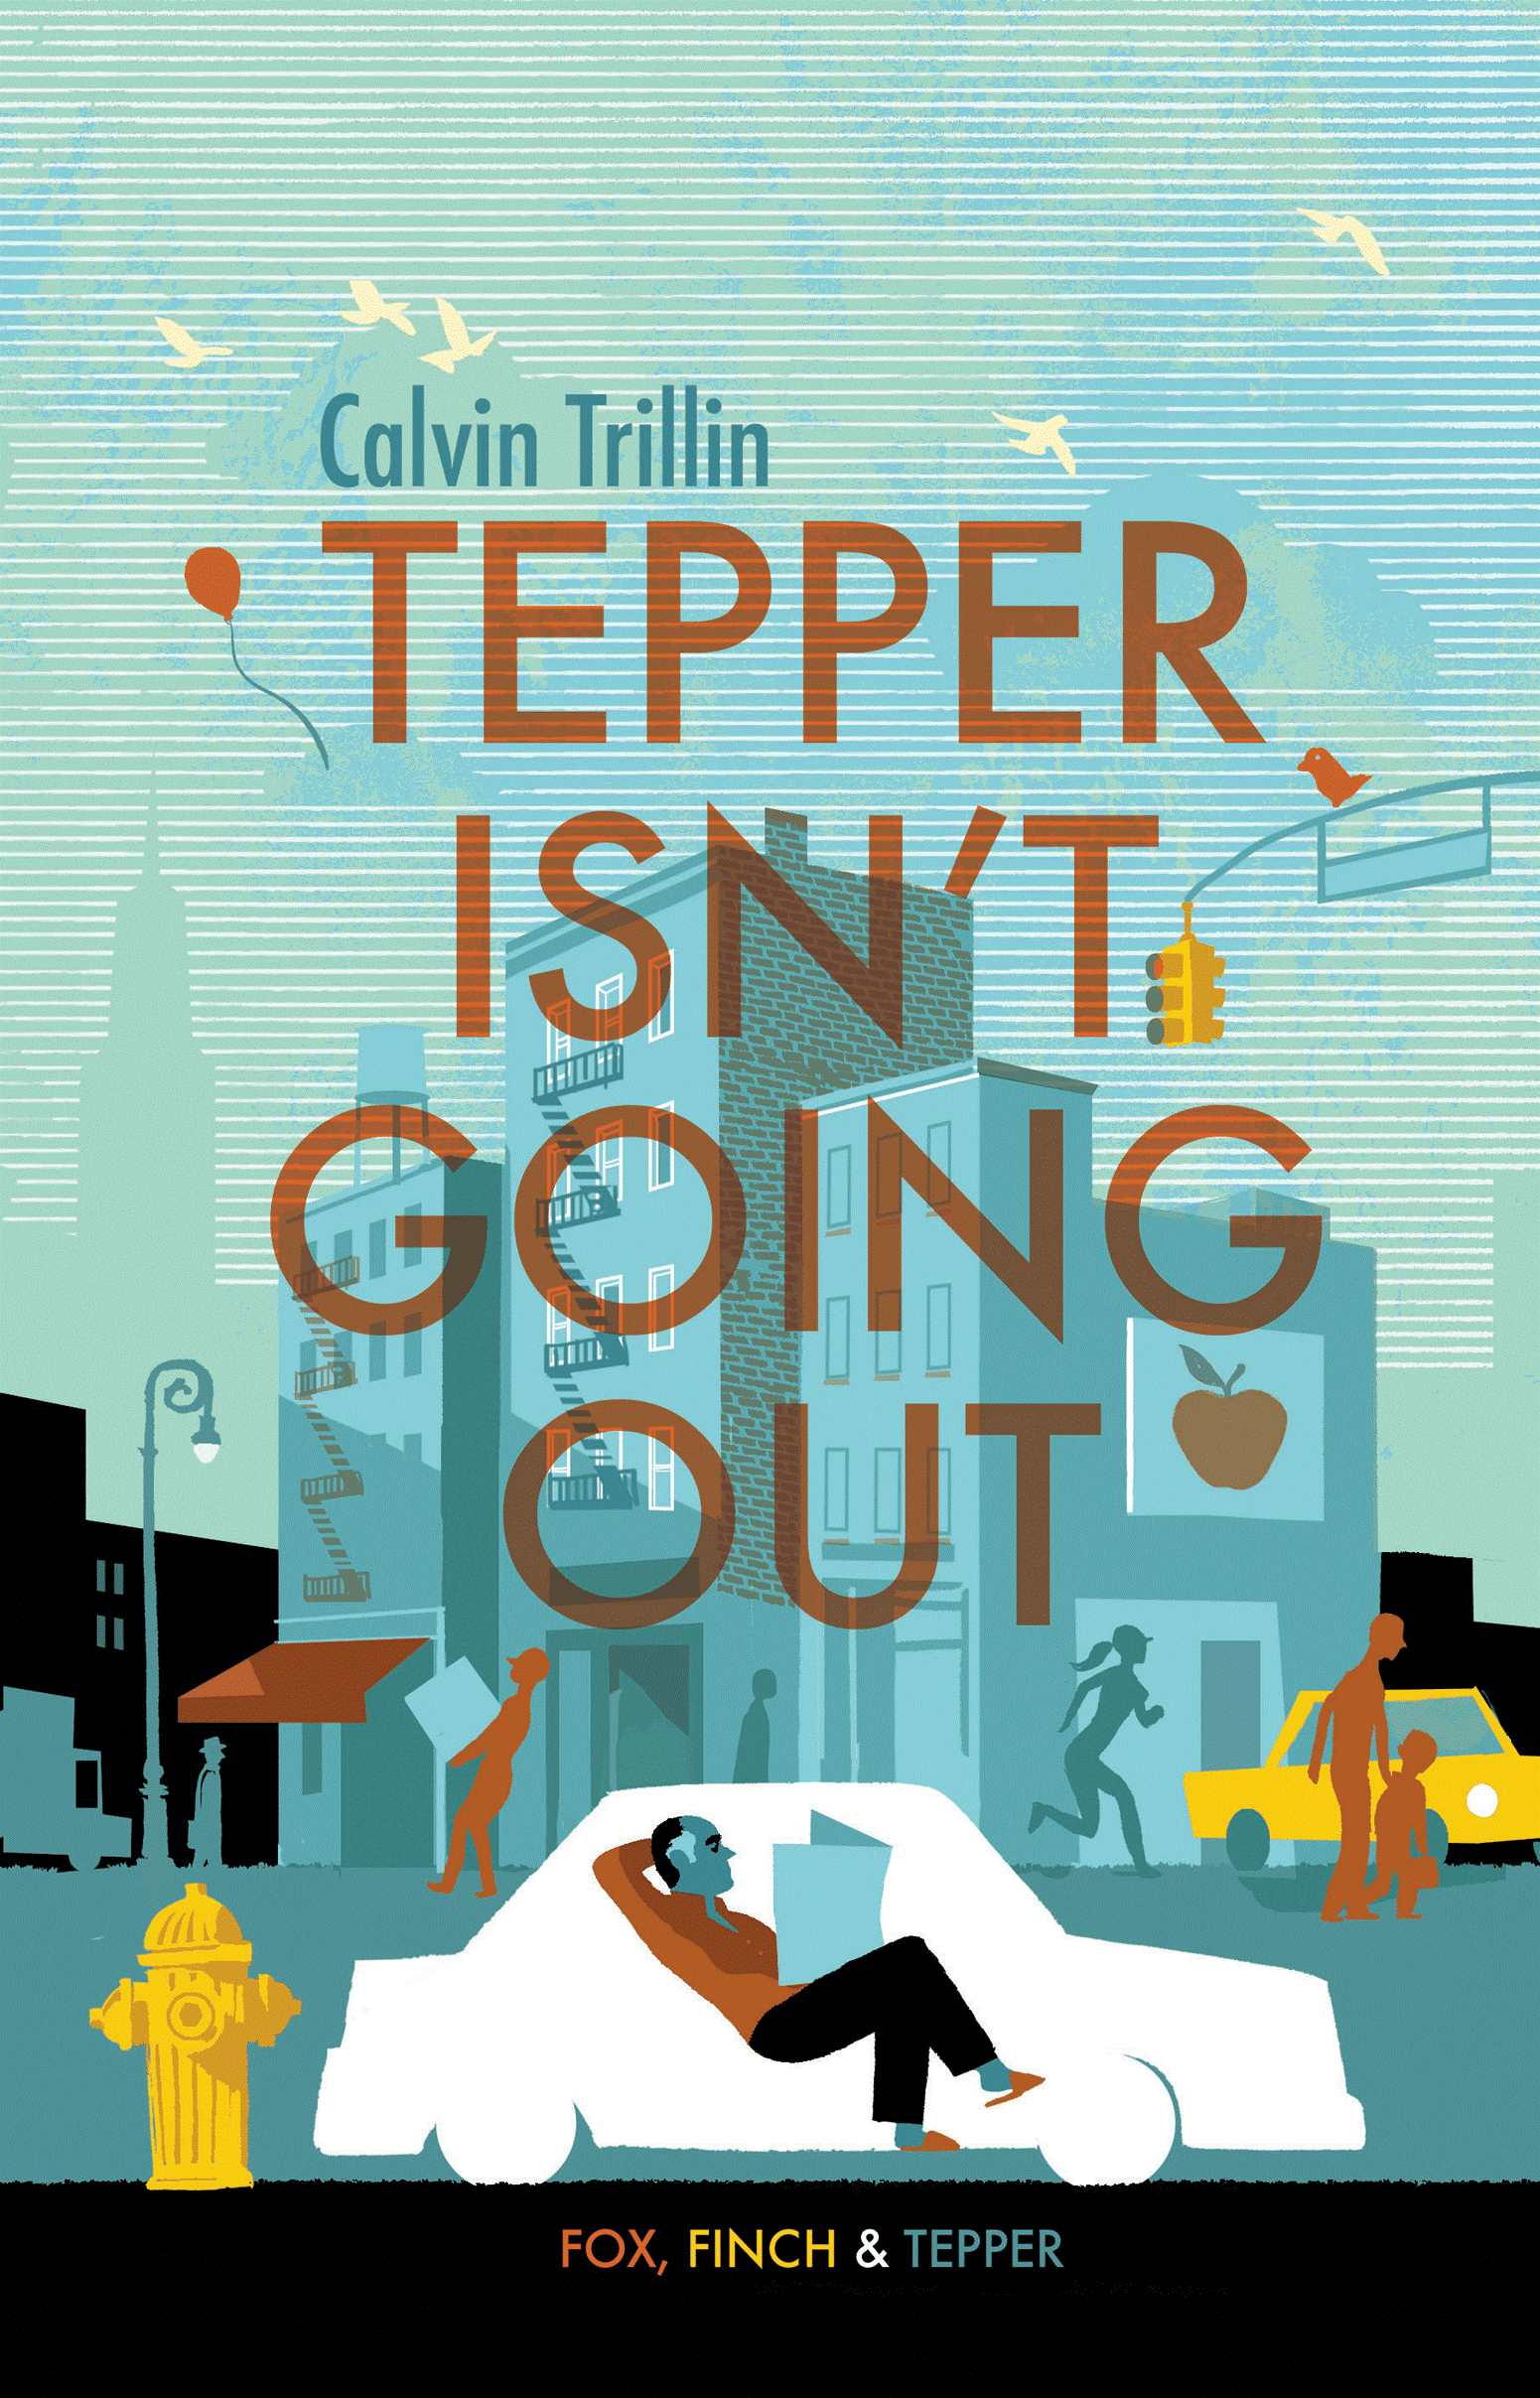 Tepper Isn't Going Out Cover